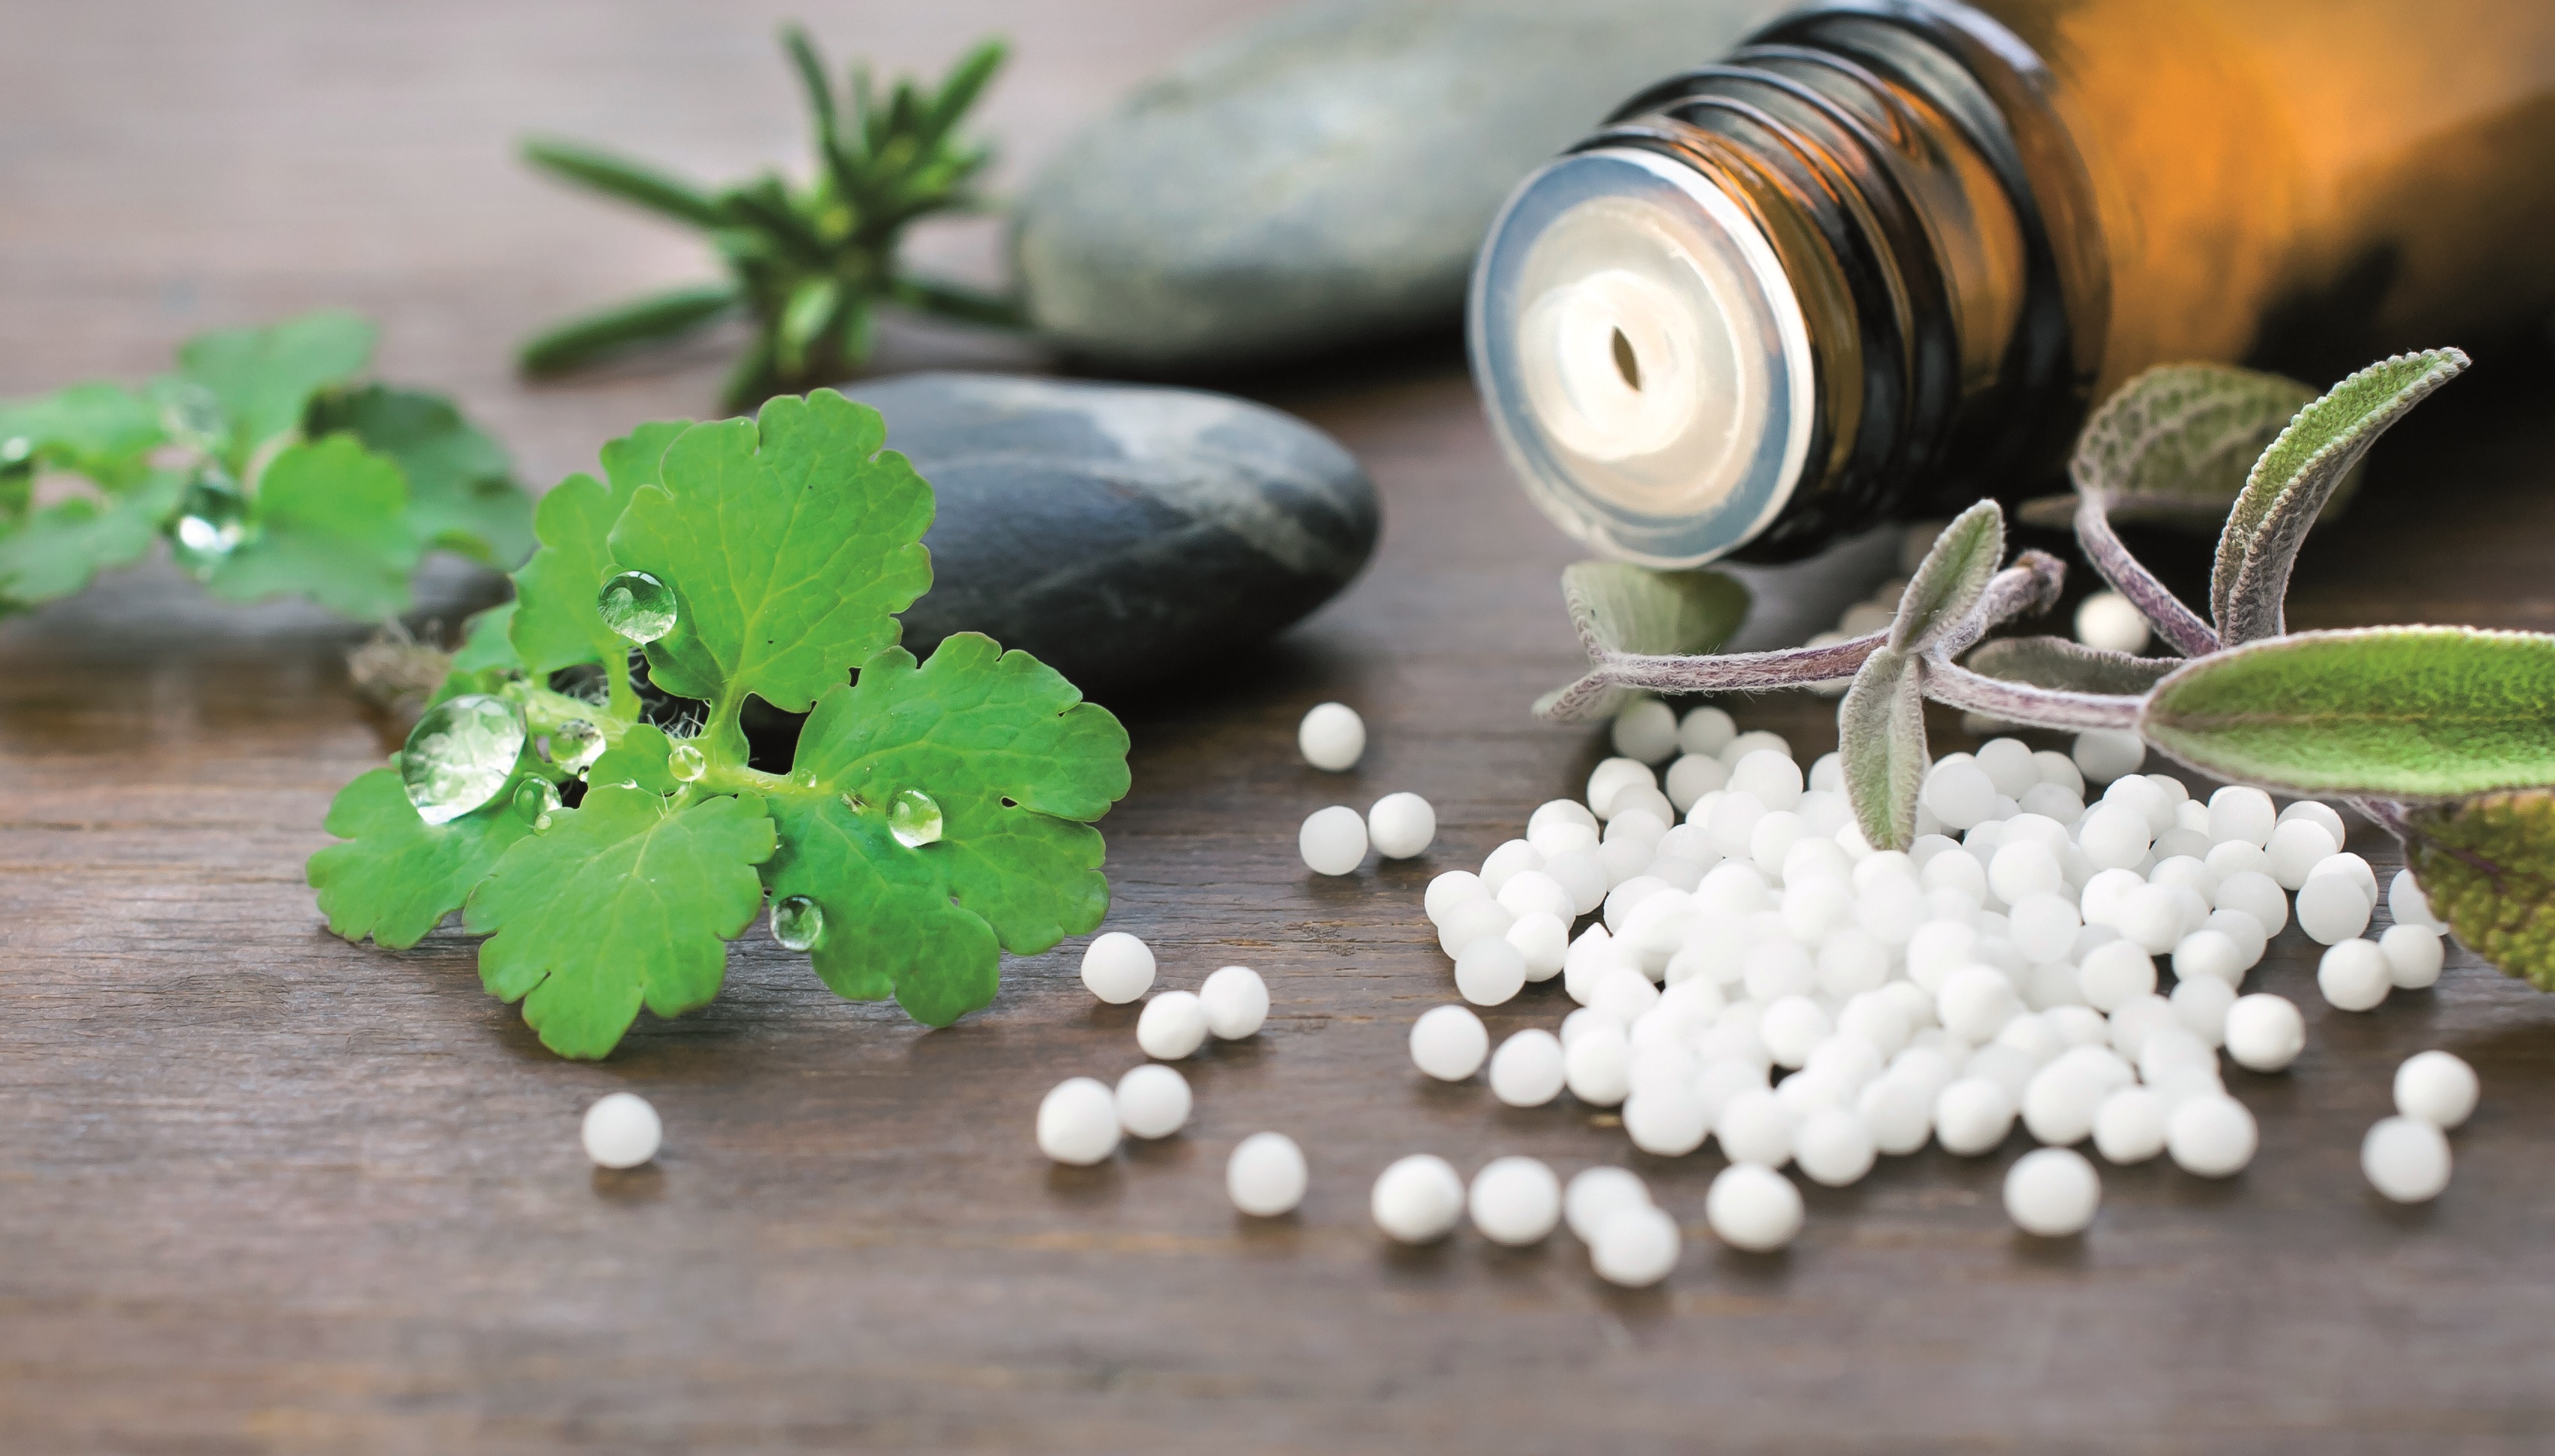 Homeopathy - Which Way Now? - Homeopathic Remedies